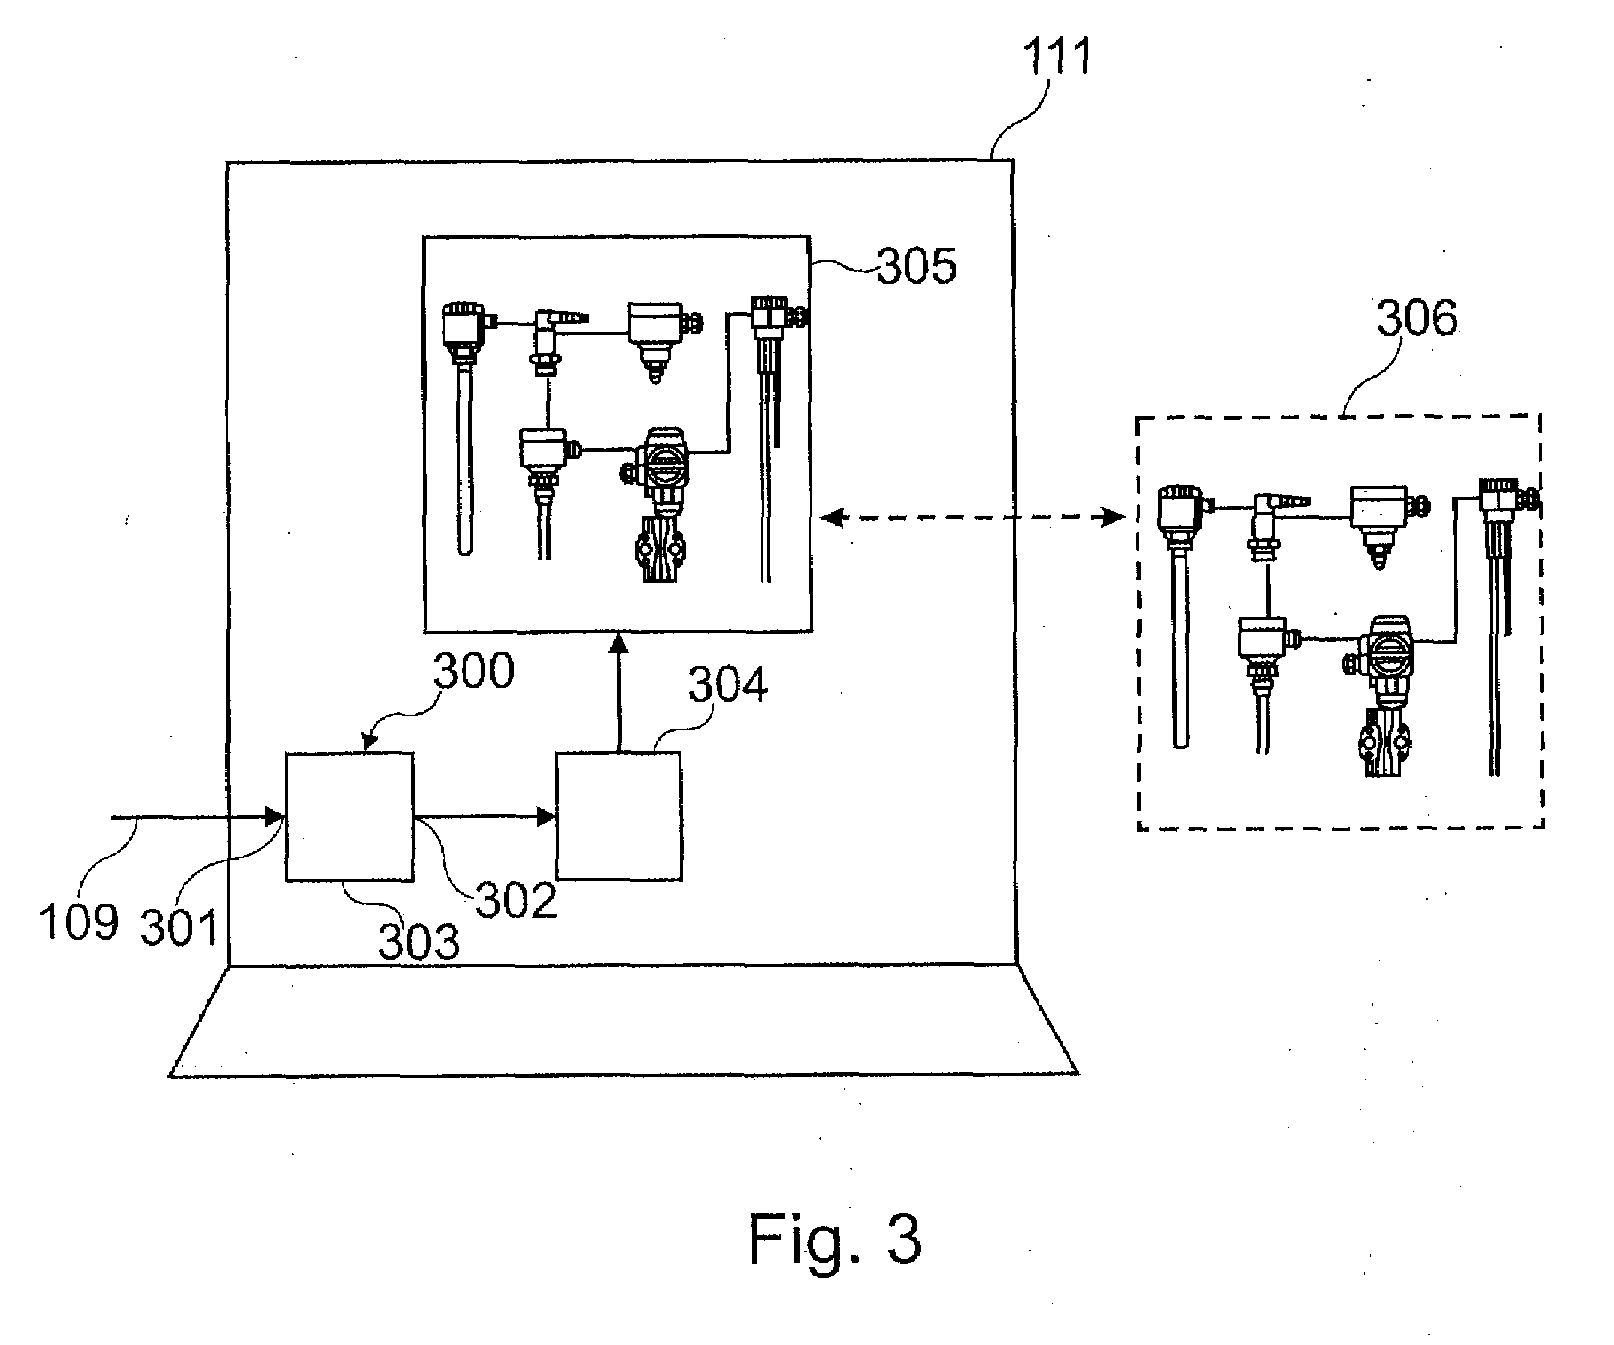 Device and Method for Generating a User Interface Configuration for a Field Device